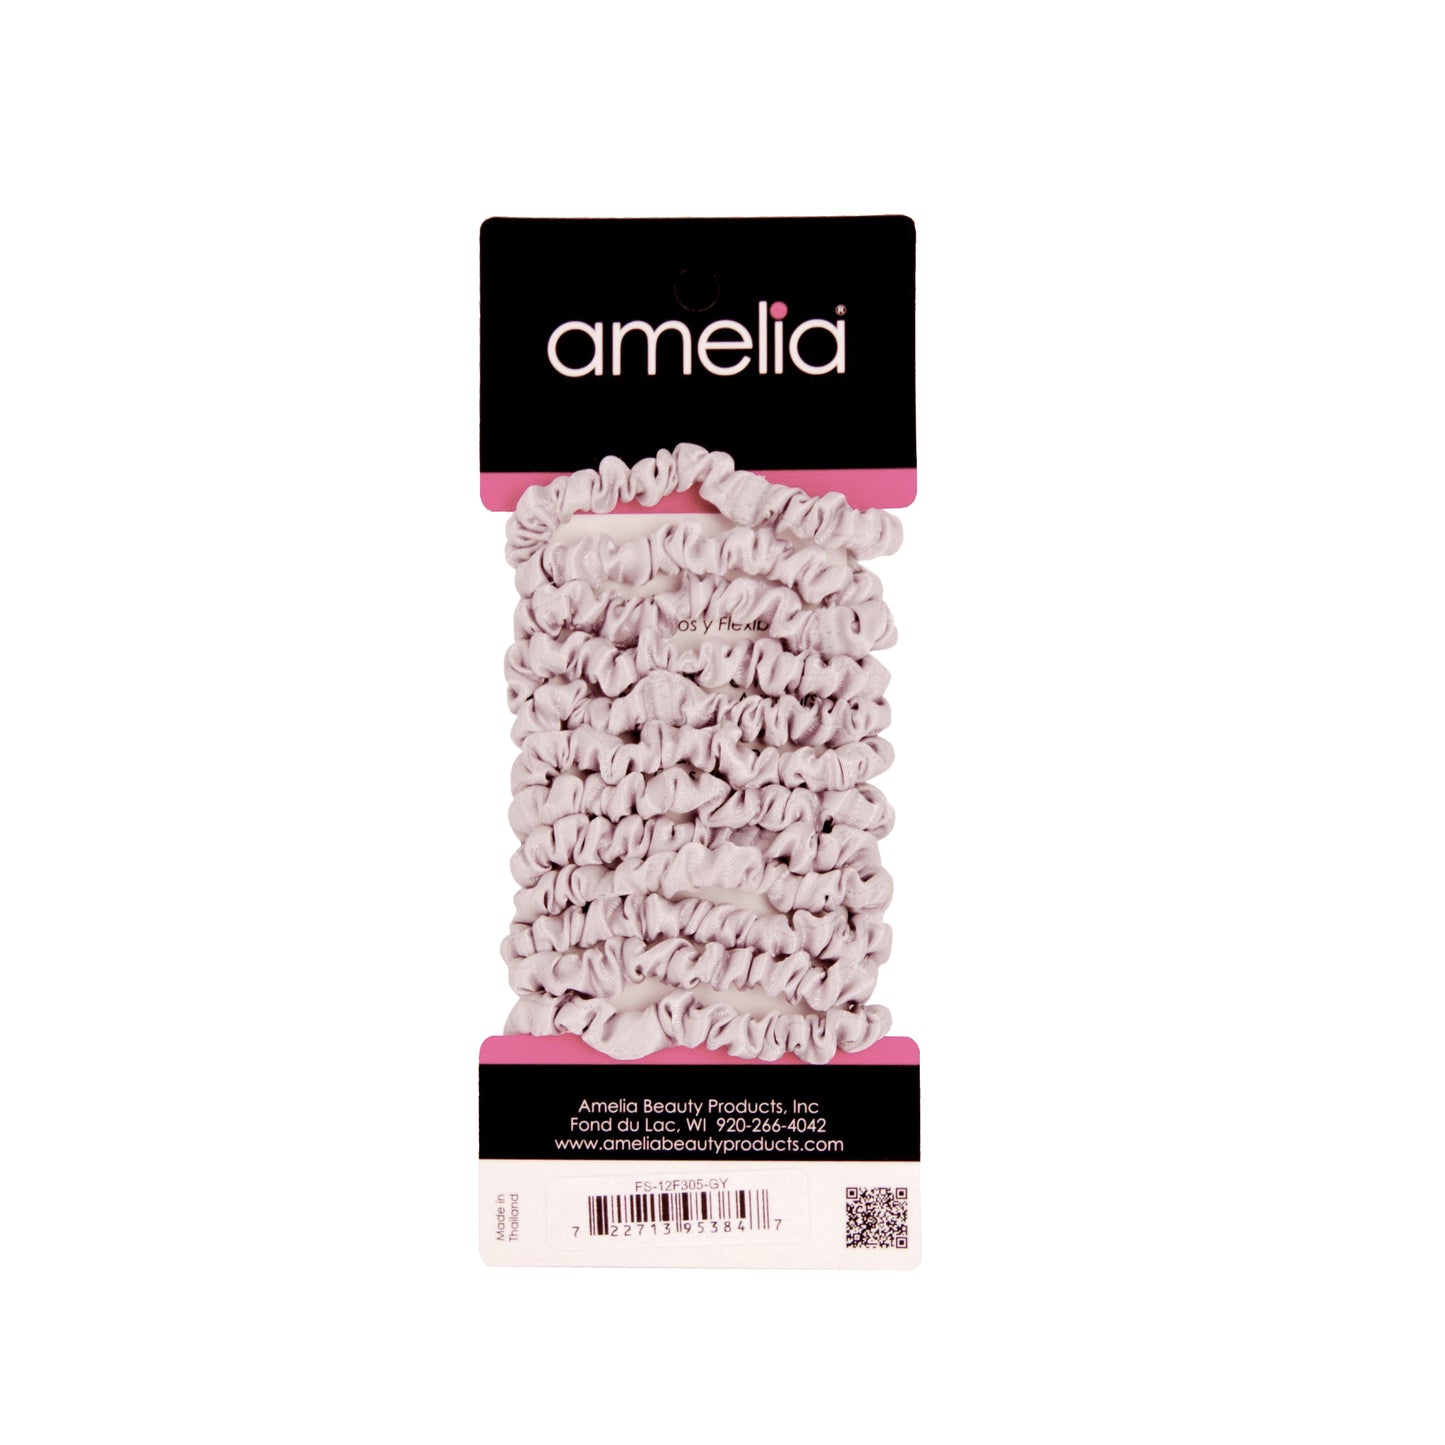 Amelia Beauty, Grey Skinny Satin Scrunchies, 2in Diameter, Gentle and Strong Hold, No Snag, No Dents or Creases. 12 Pack